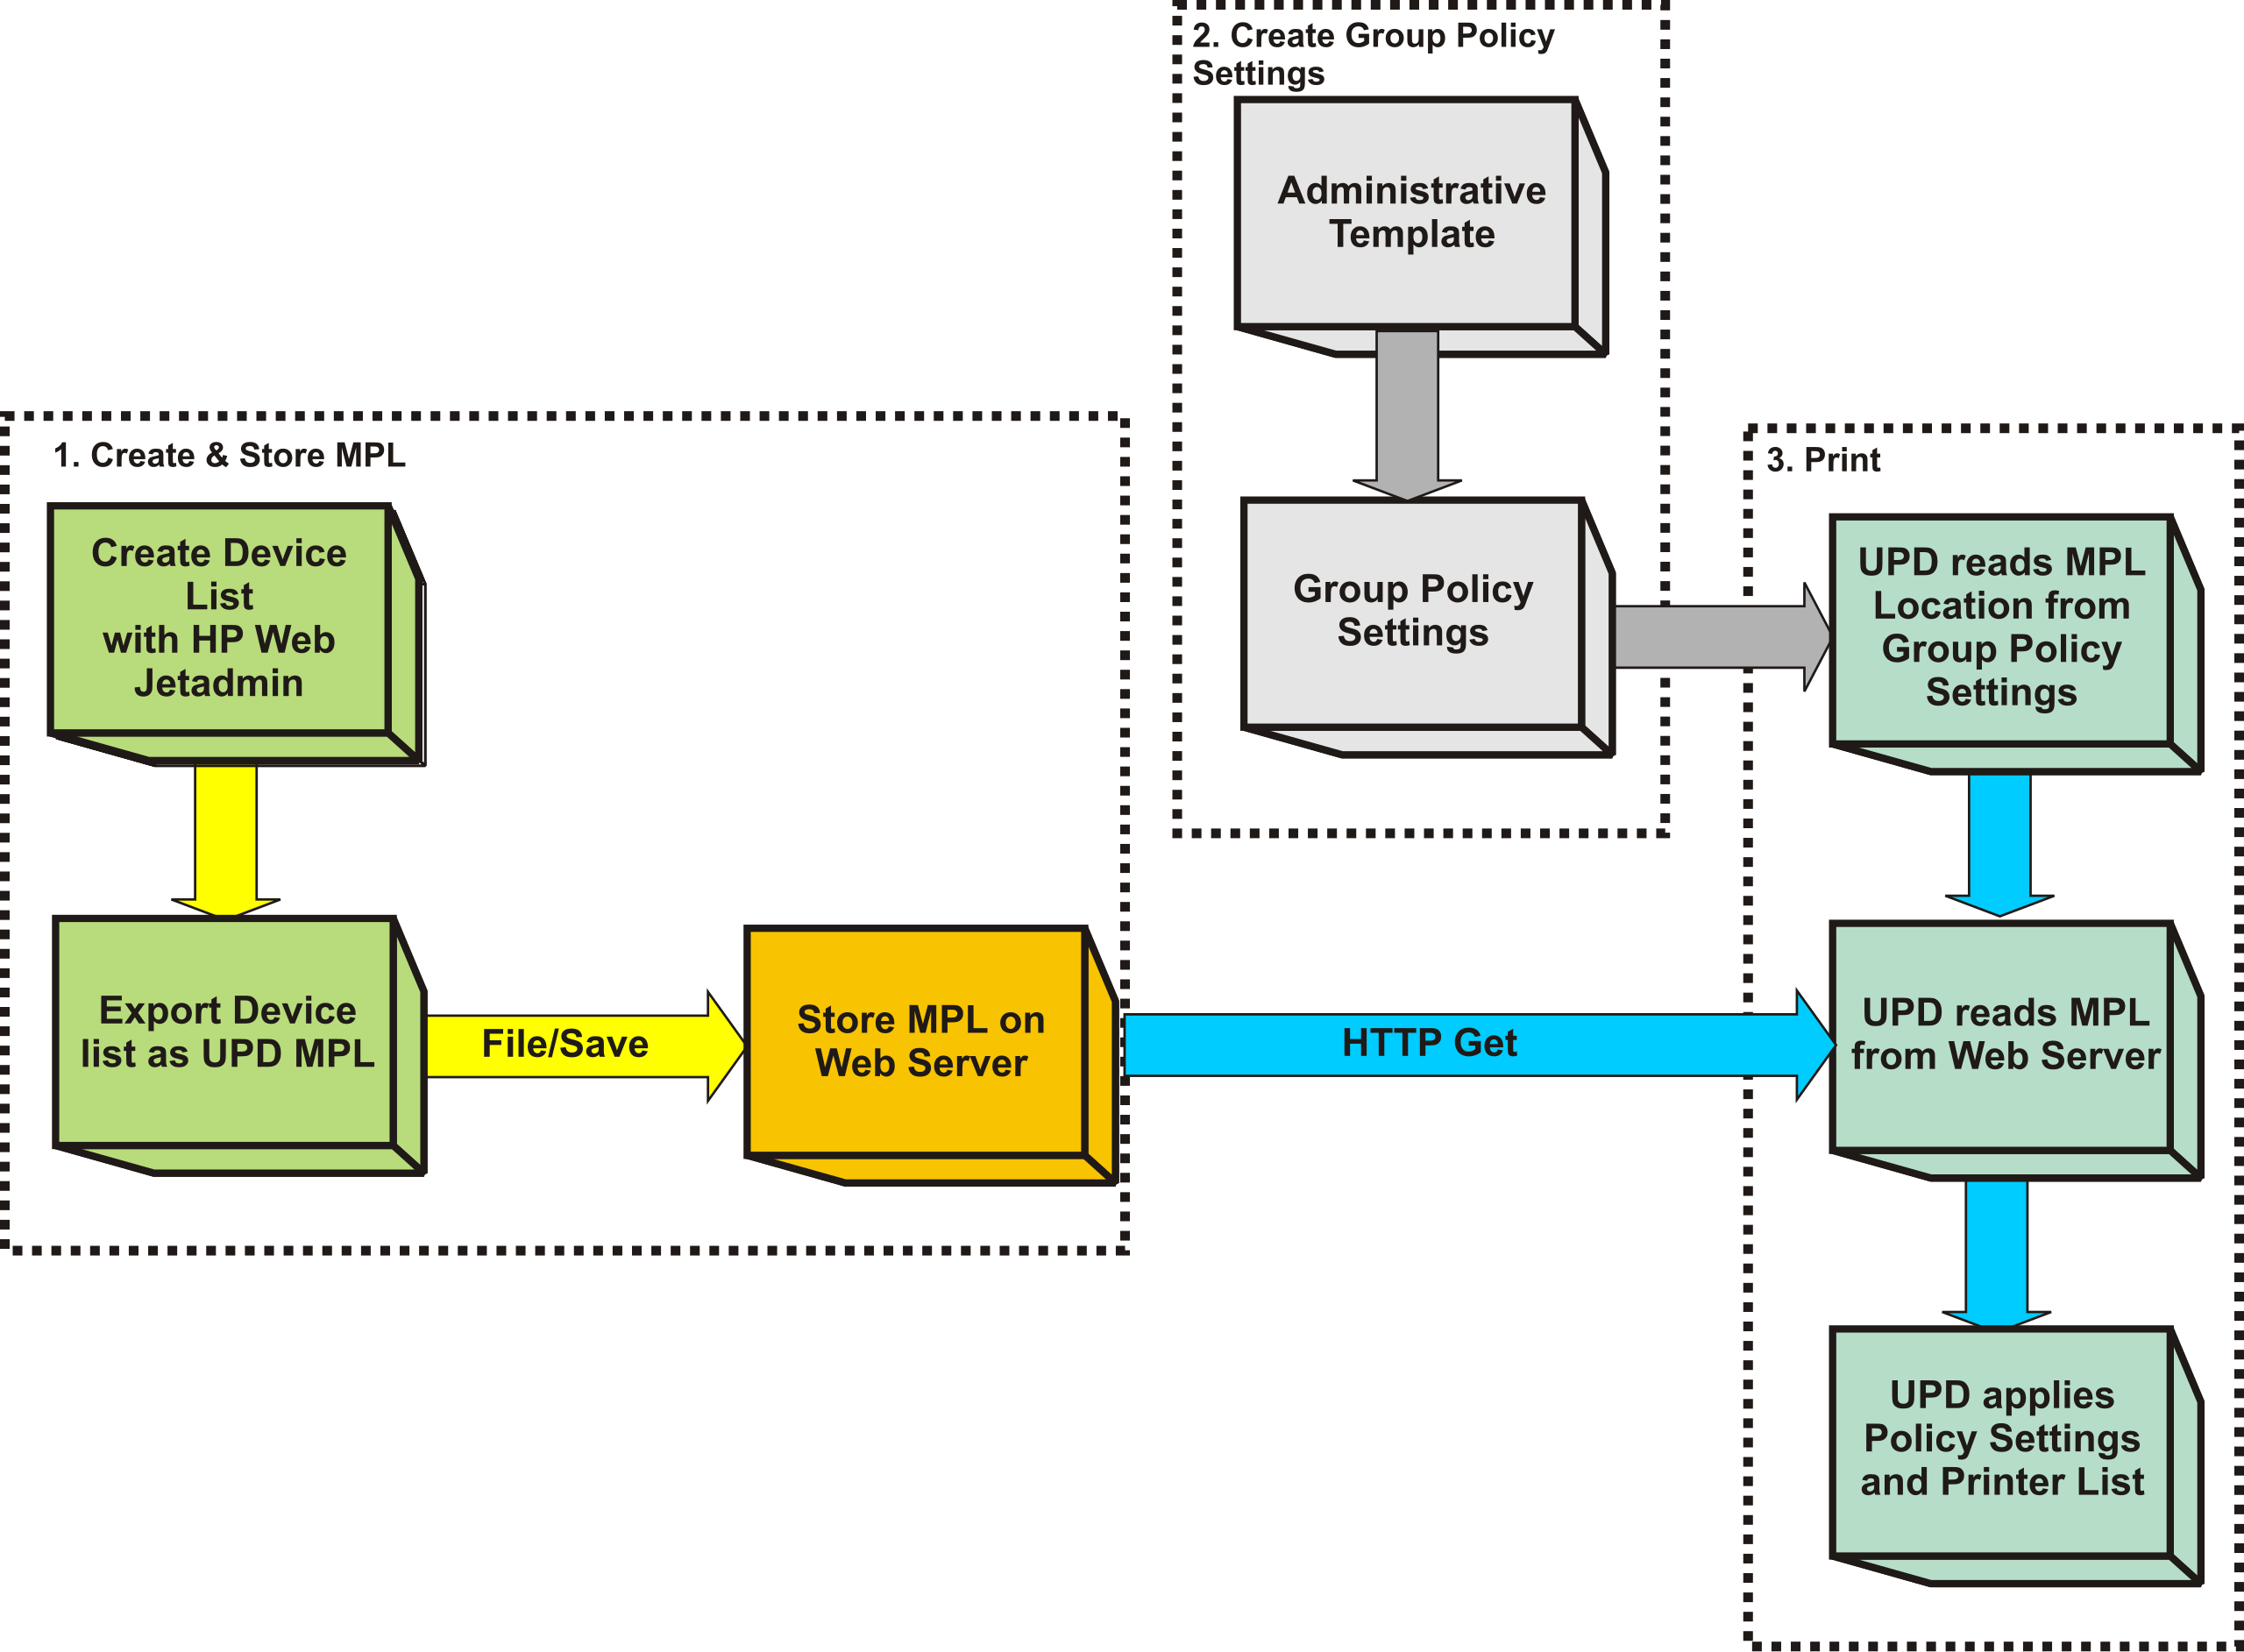 File:Hp upd mpls and mpps.svg - Wikipedia